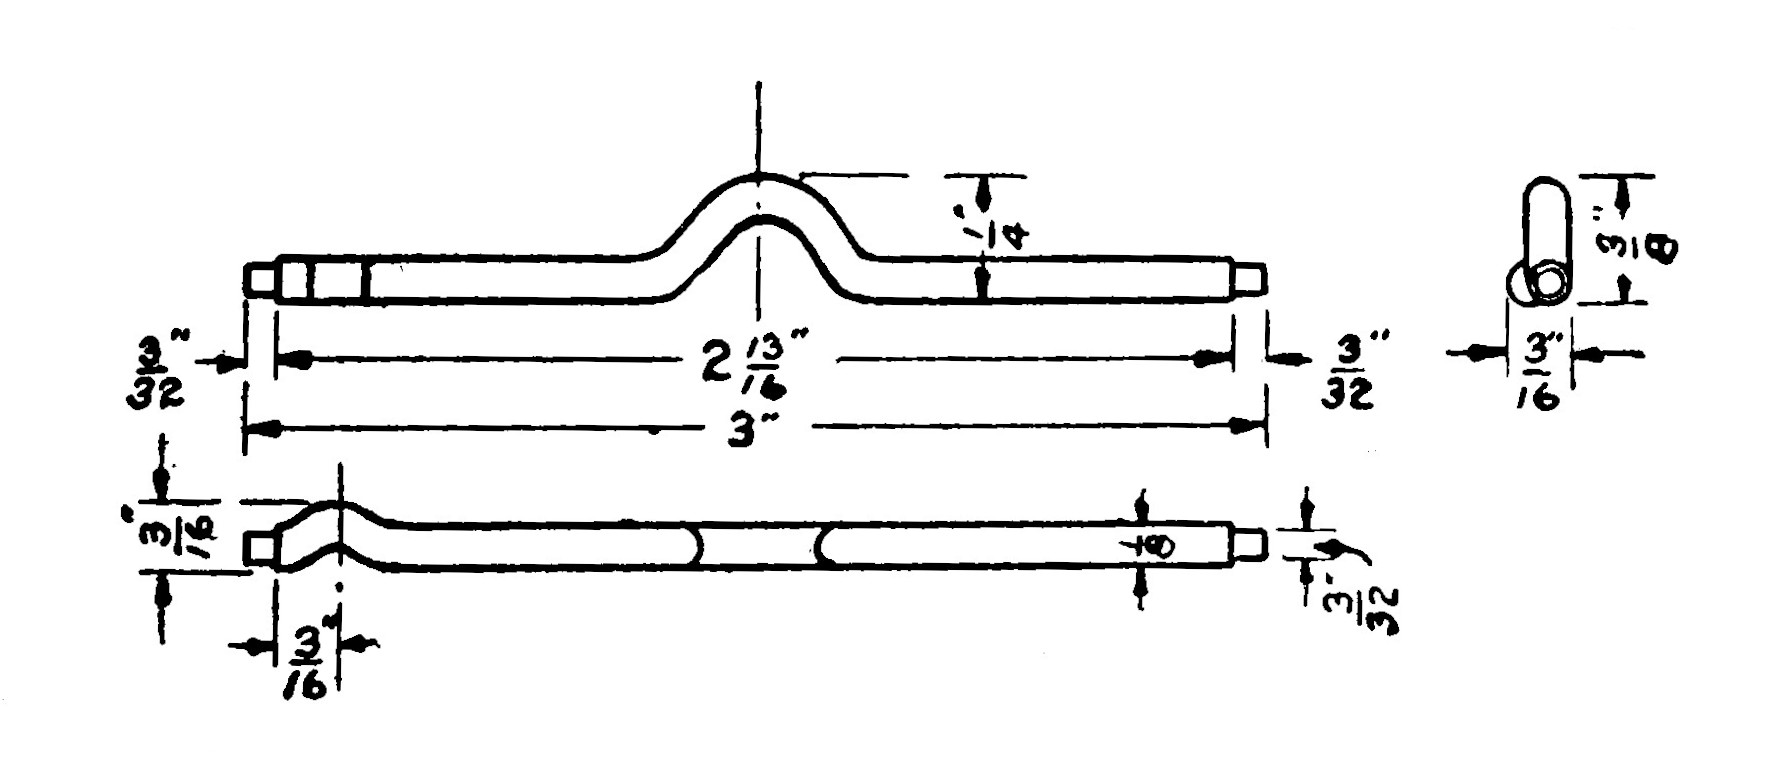 FIG. 55.—The Shaft.